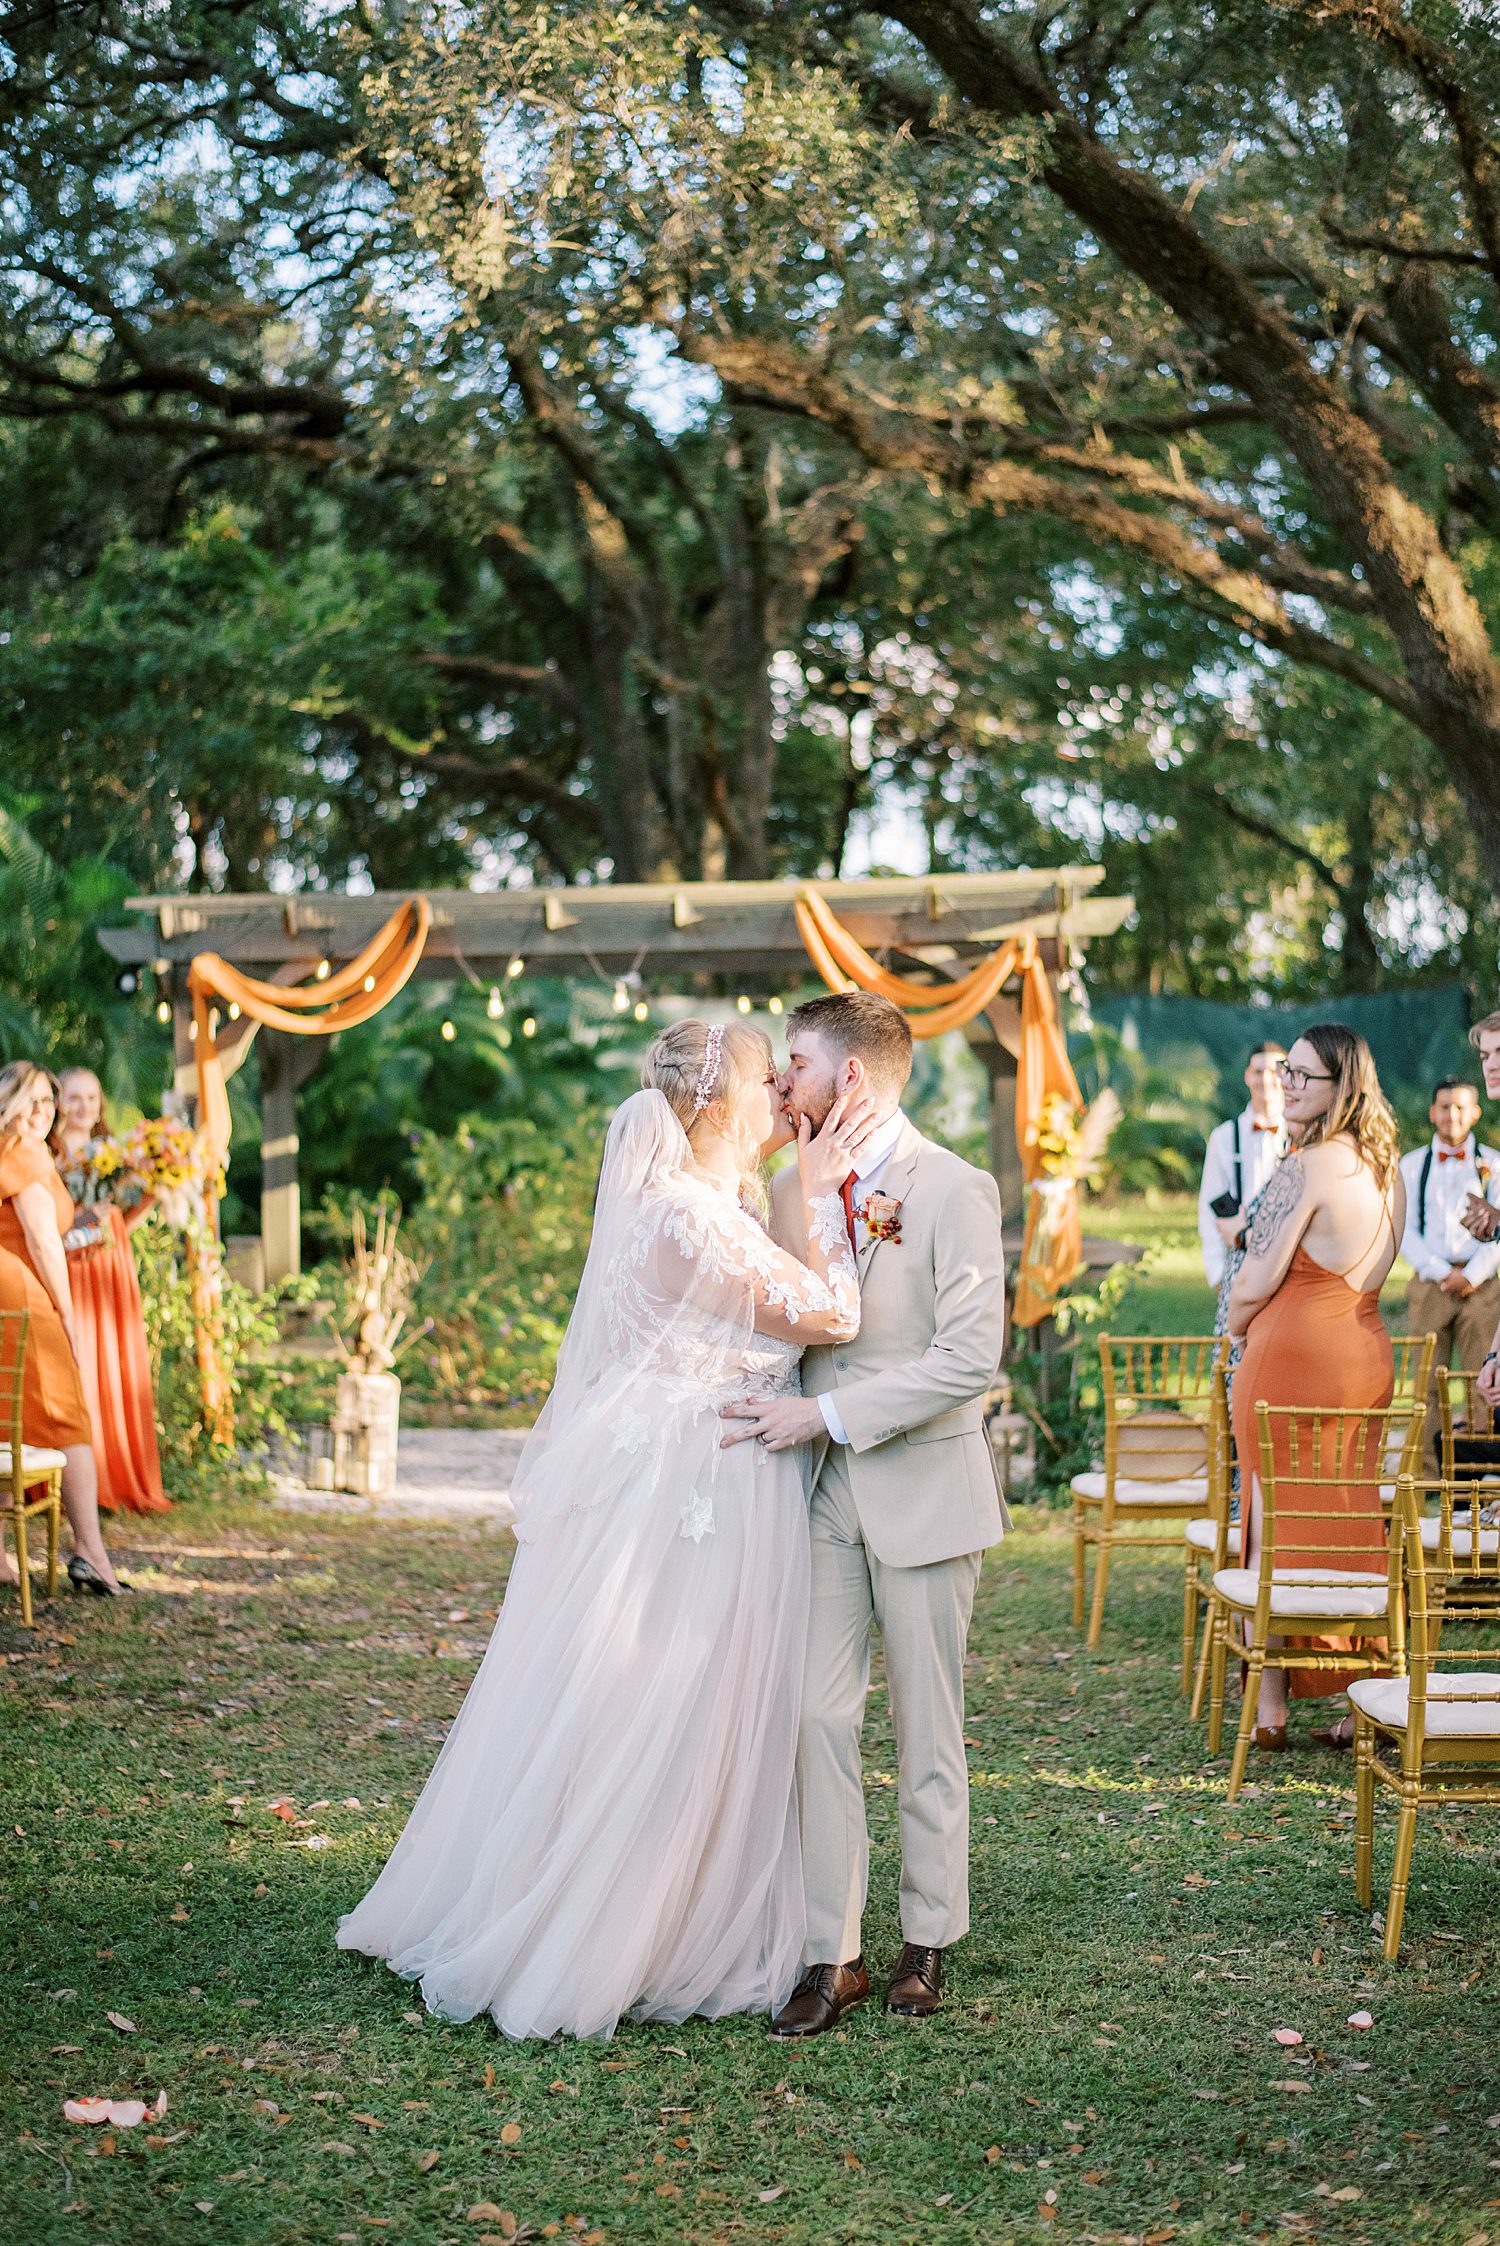 bride and groom kiss in aisle after ceremony at Events Under the Oaks